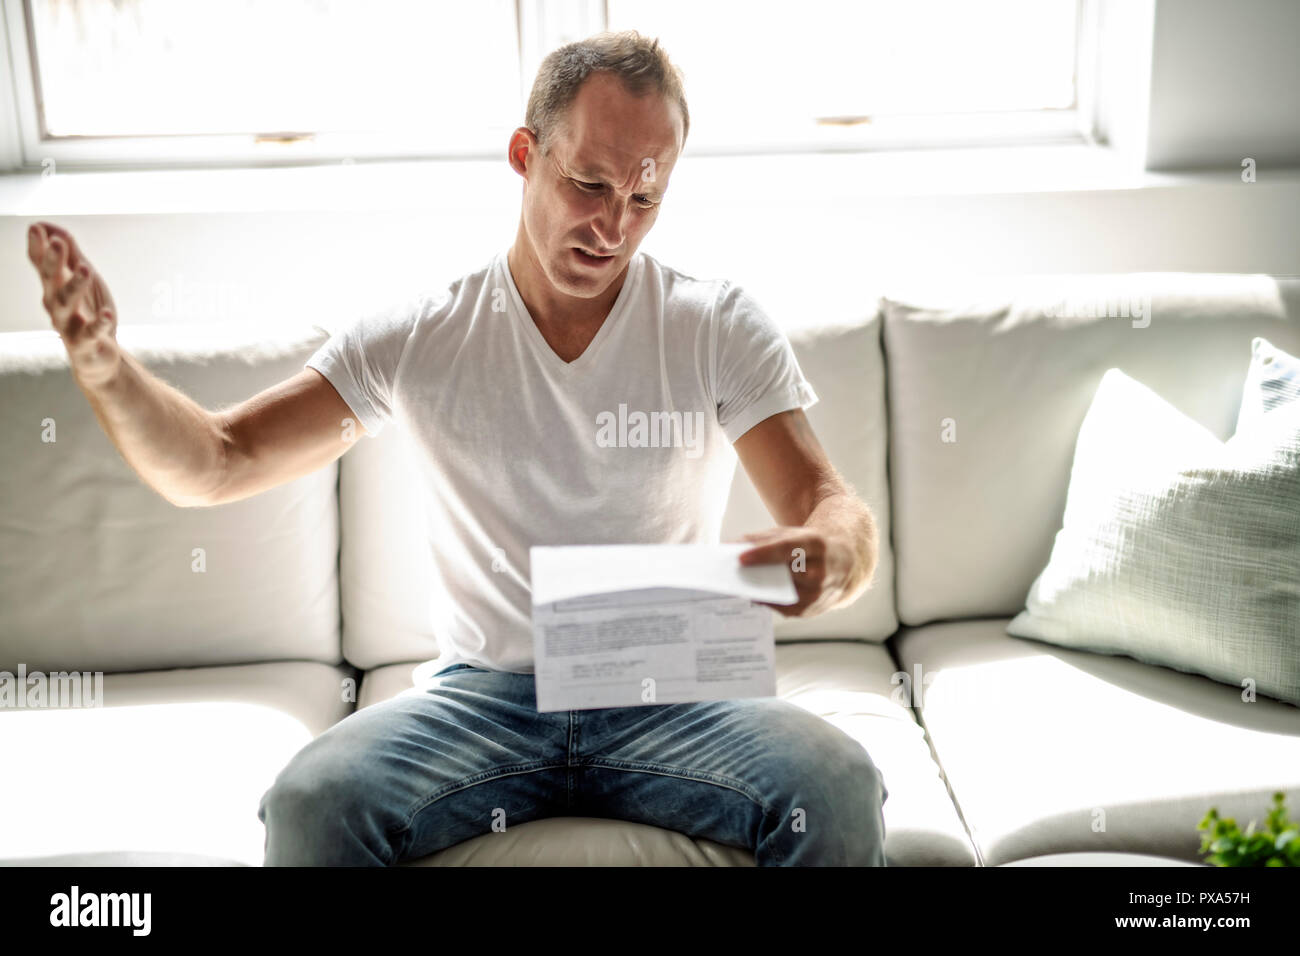 A bad news. Depressed mature man holding paper Stock Photo